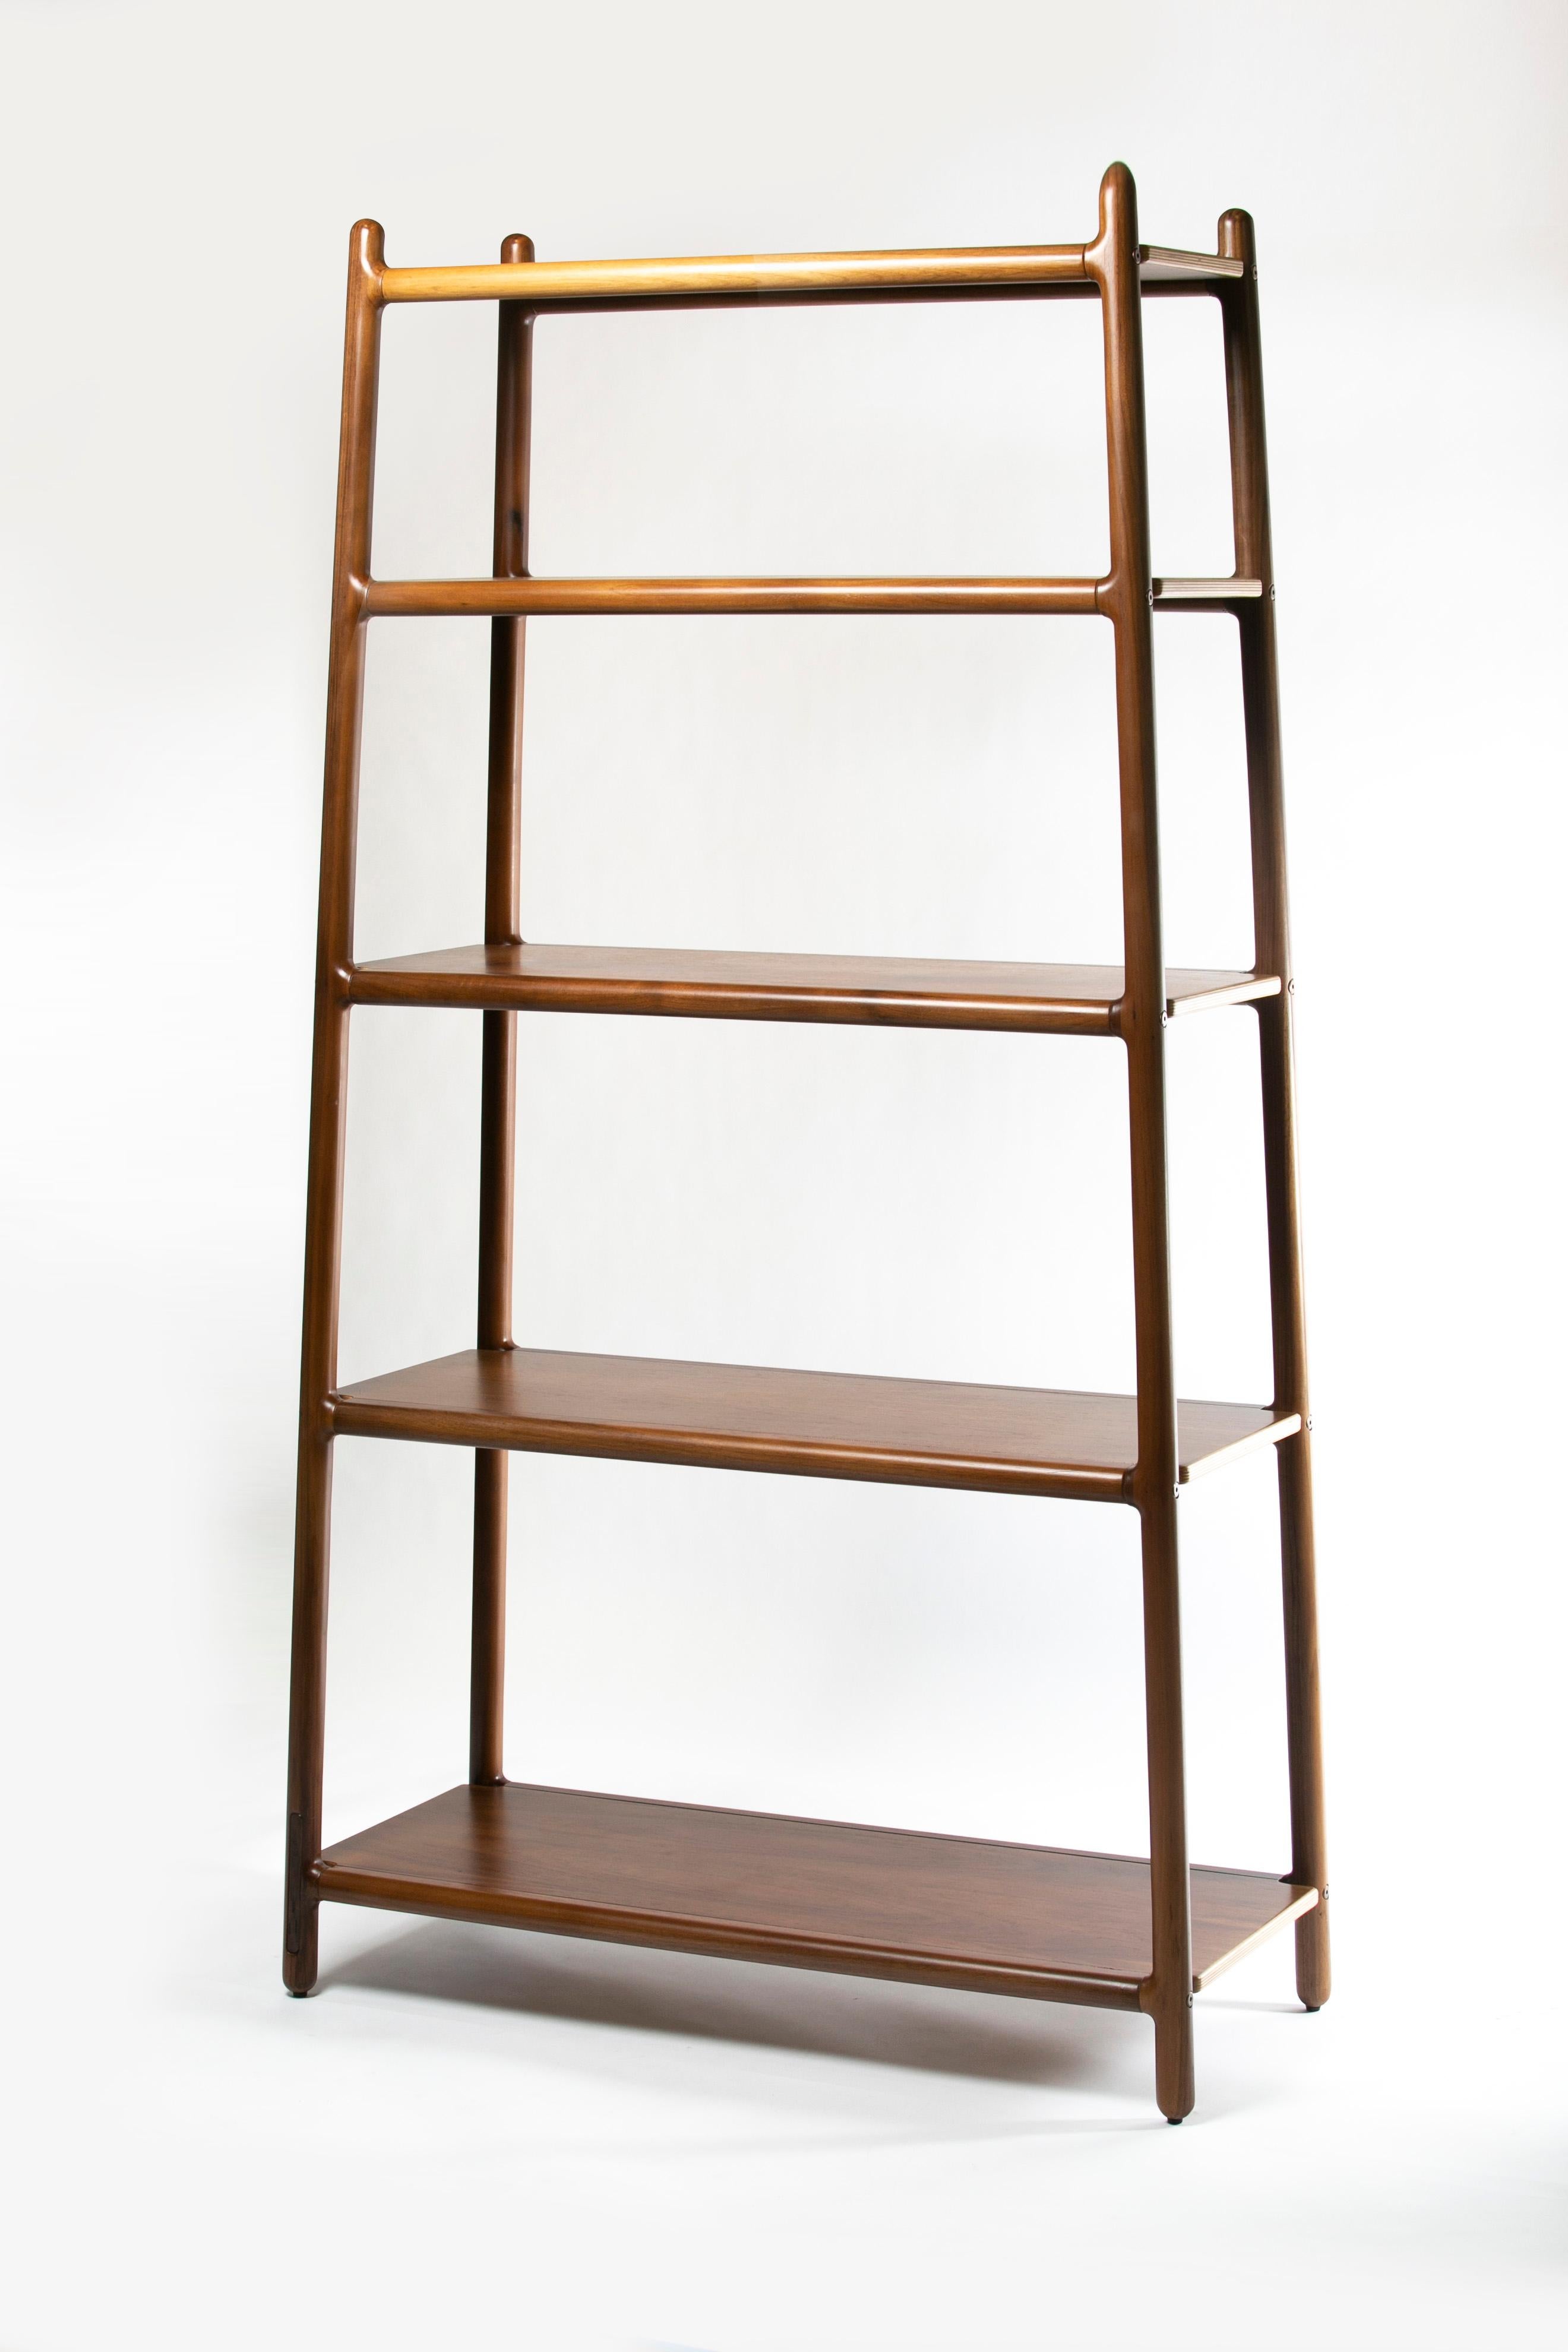  Mictlán 80, Walnut Bookcase, Contemporary Mexican Design by Juskani Alonso In New Condition For Sale In Mexico City, MX